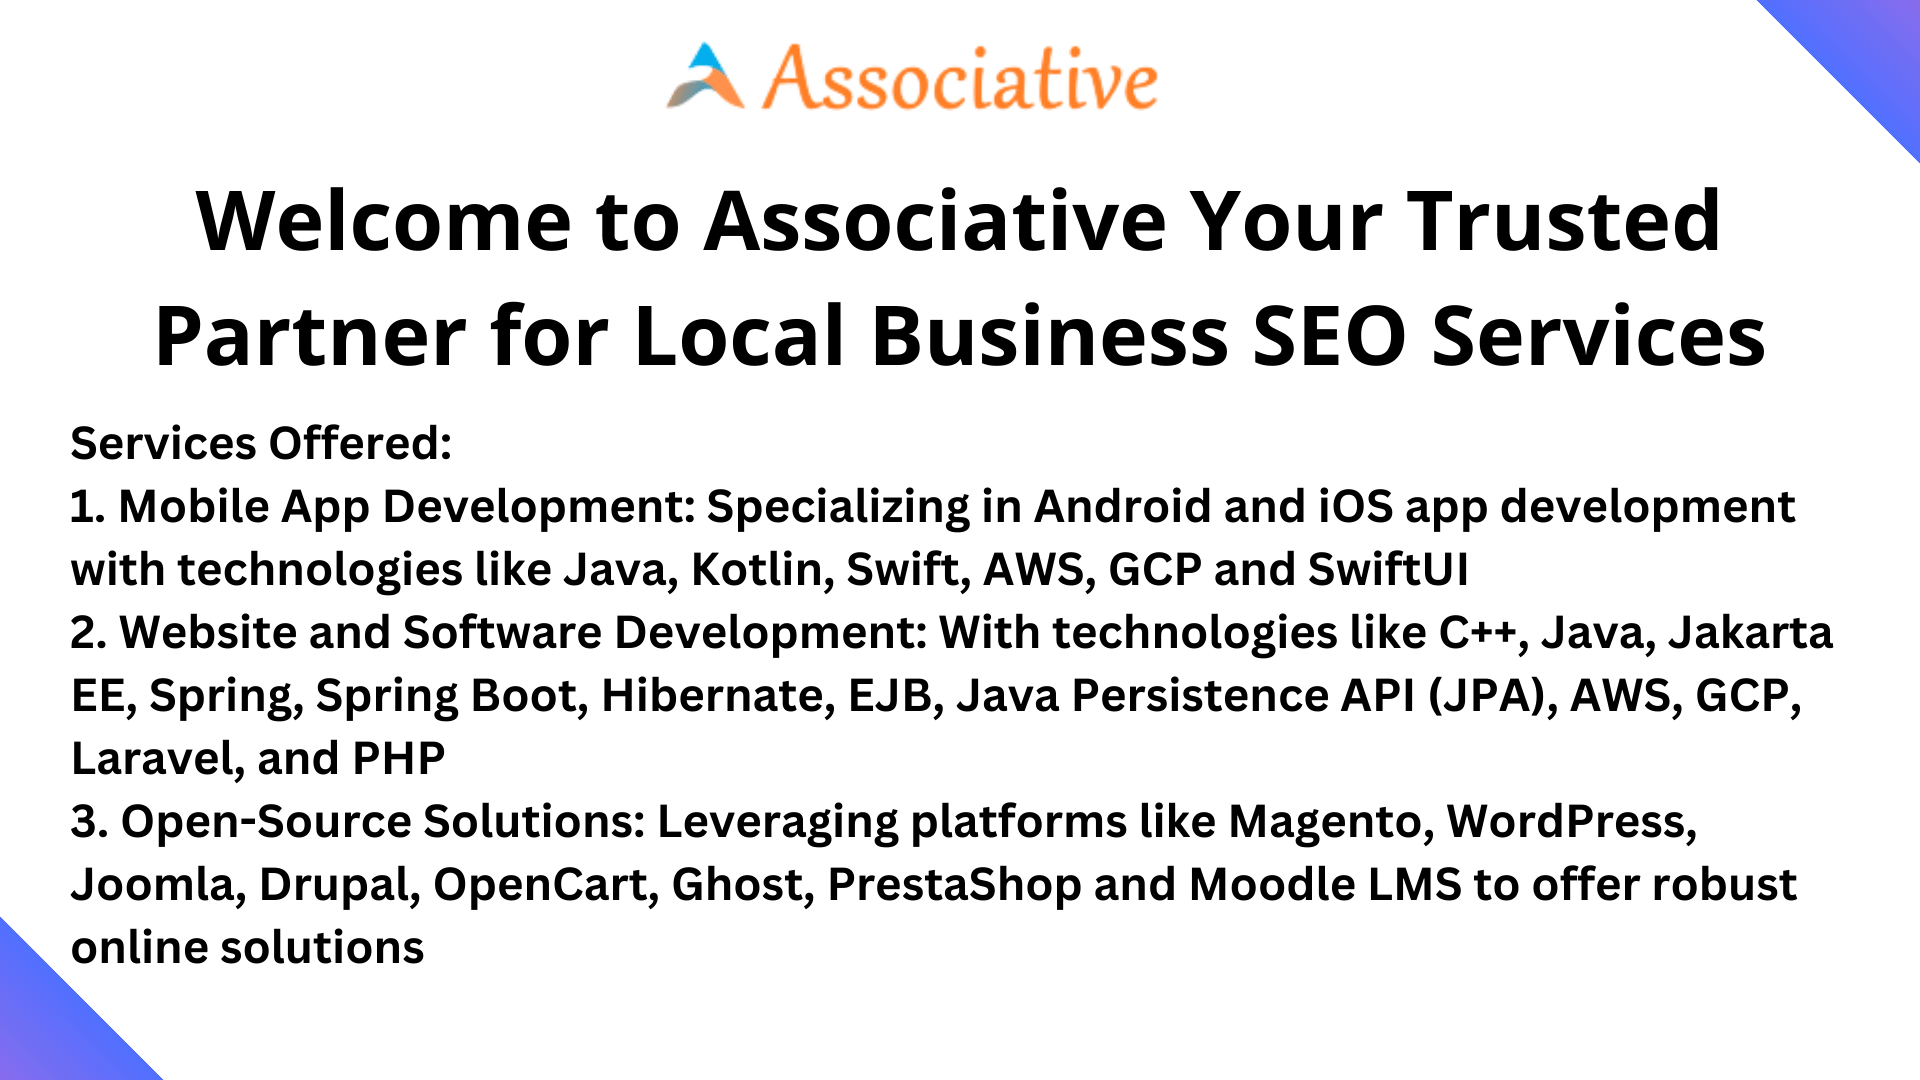 Welcome to Associative Your Trusted Partner for Local Business SEO Services